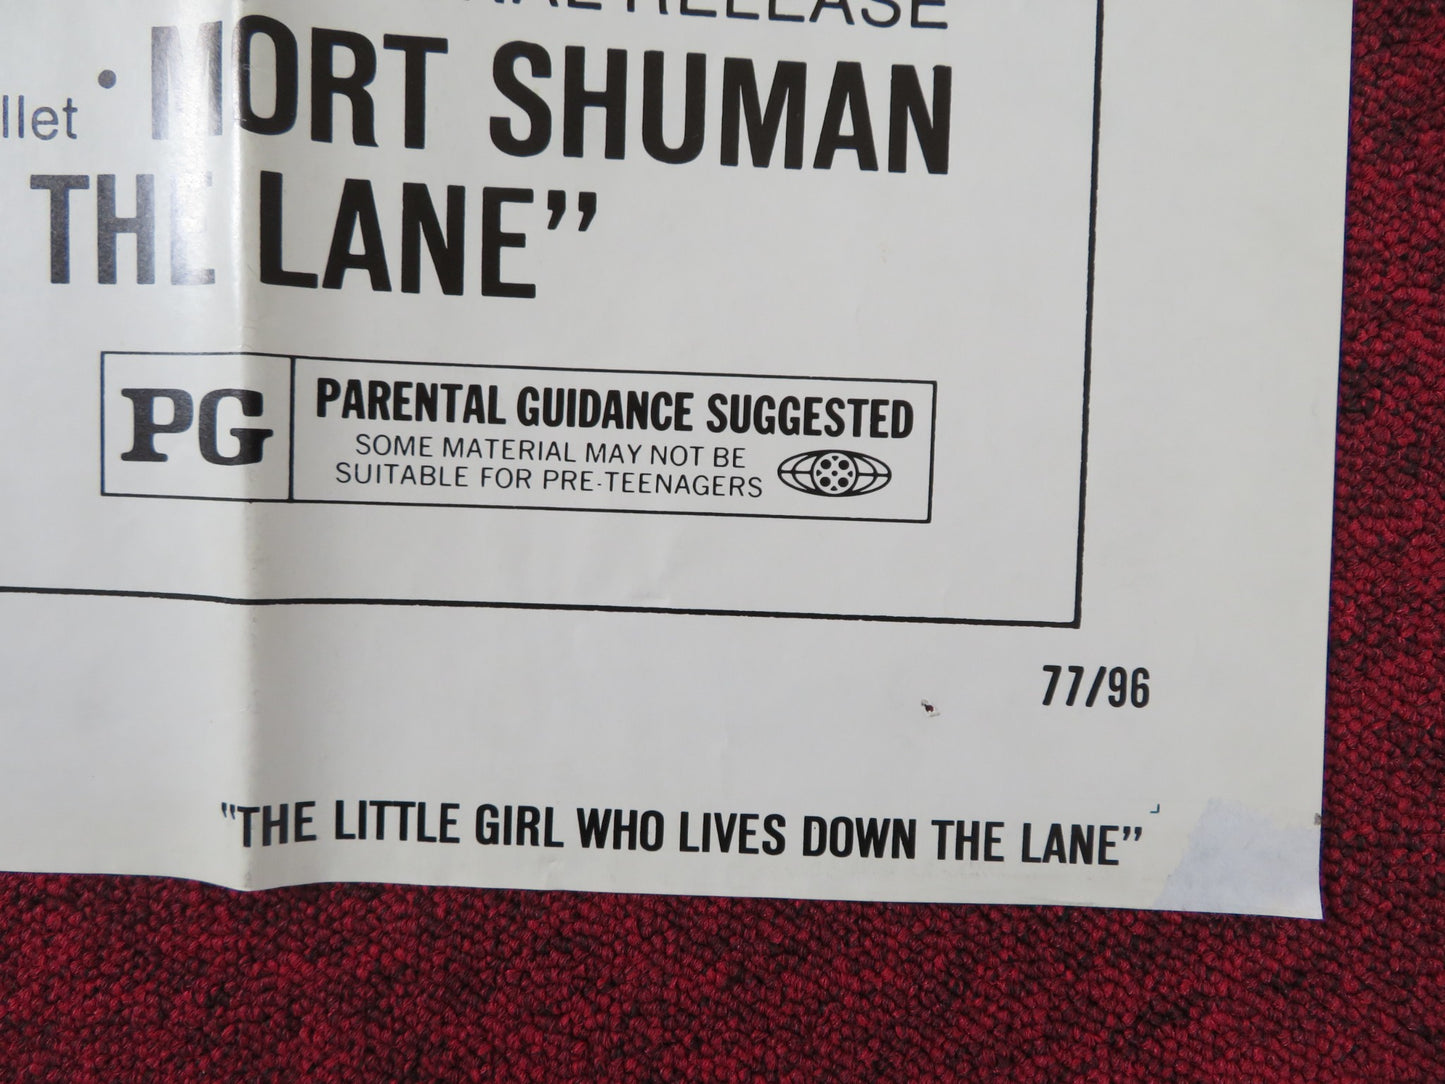 THE LITTLE GIRL WHO LIVES DOWN THE LANE FOLDED US ONE SHEET POSTER FOSTER 1977